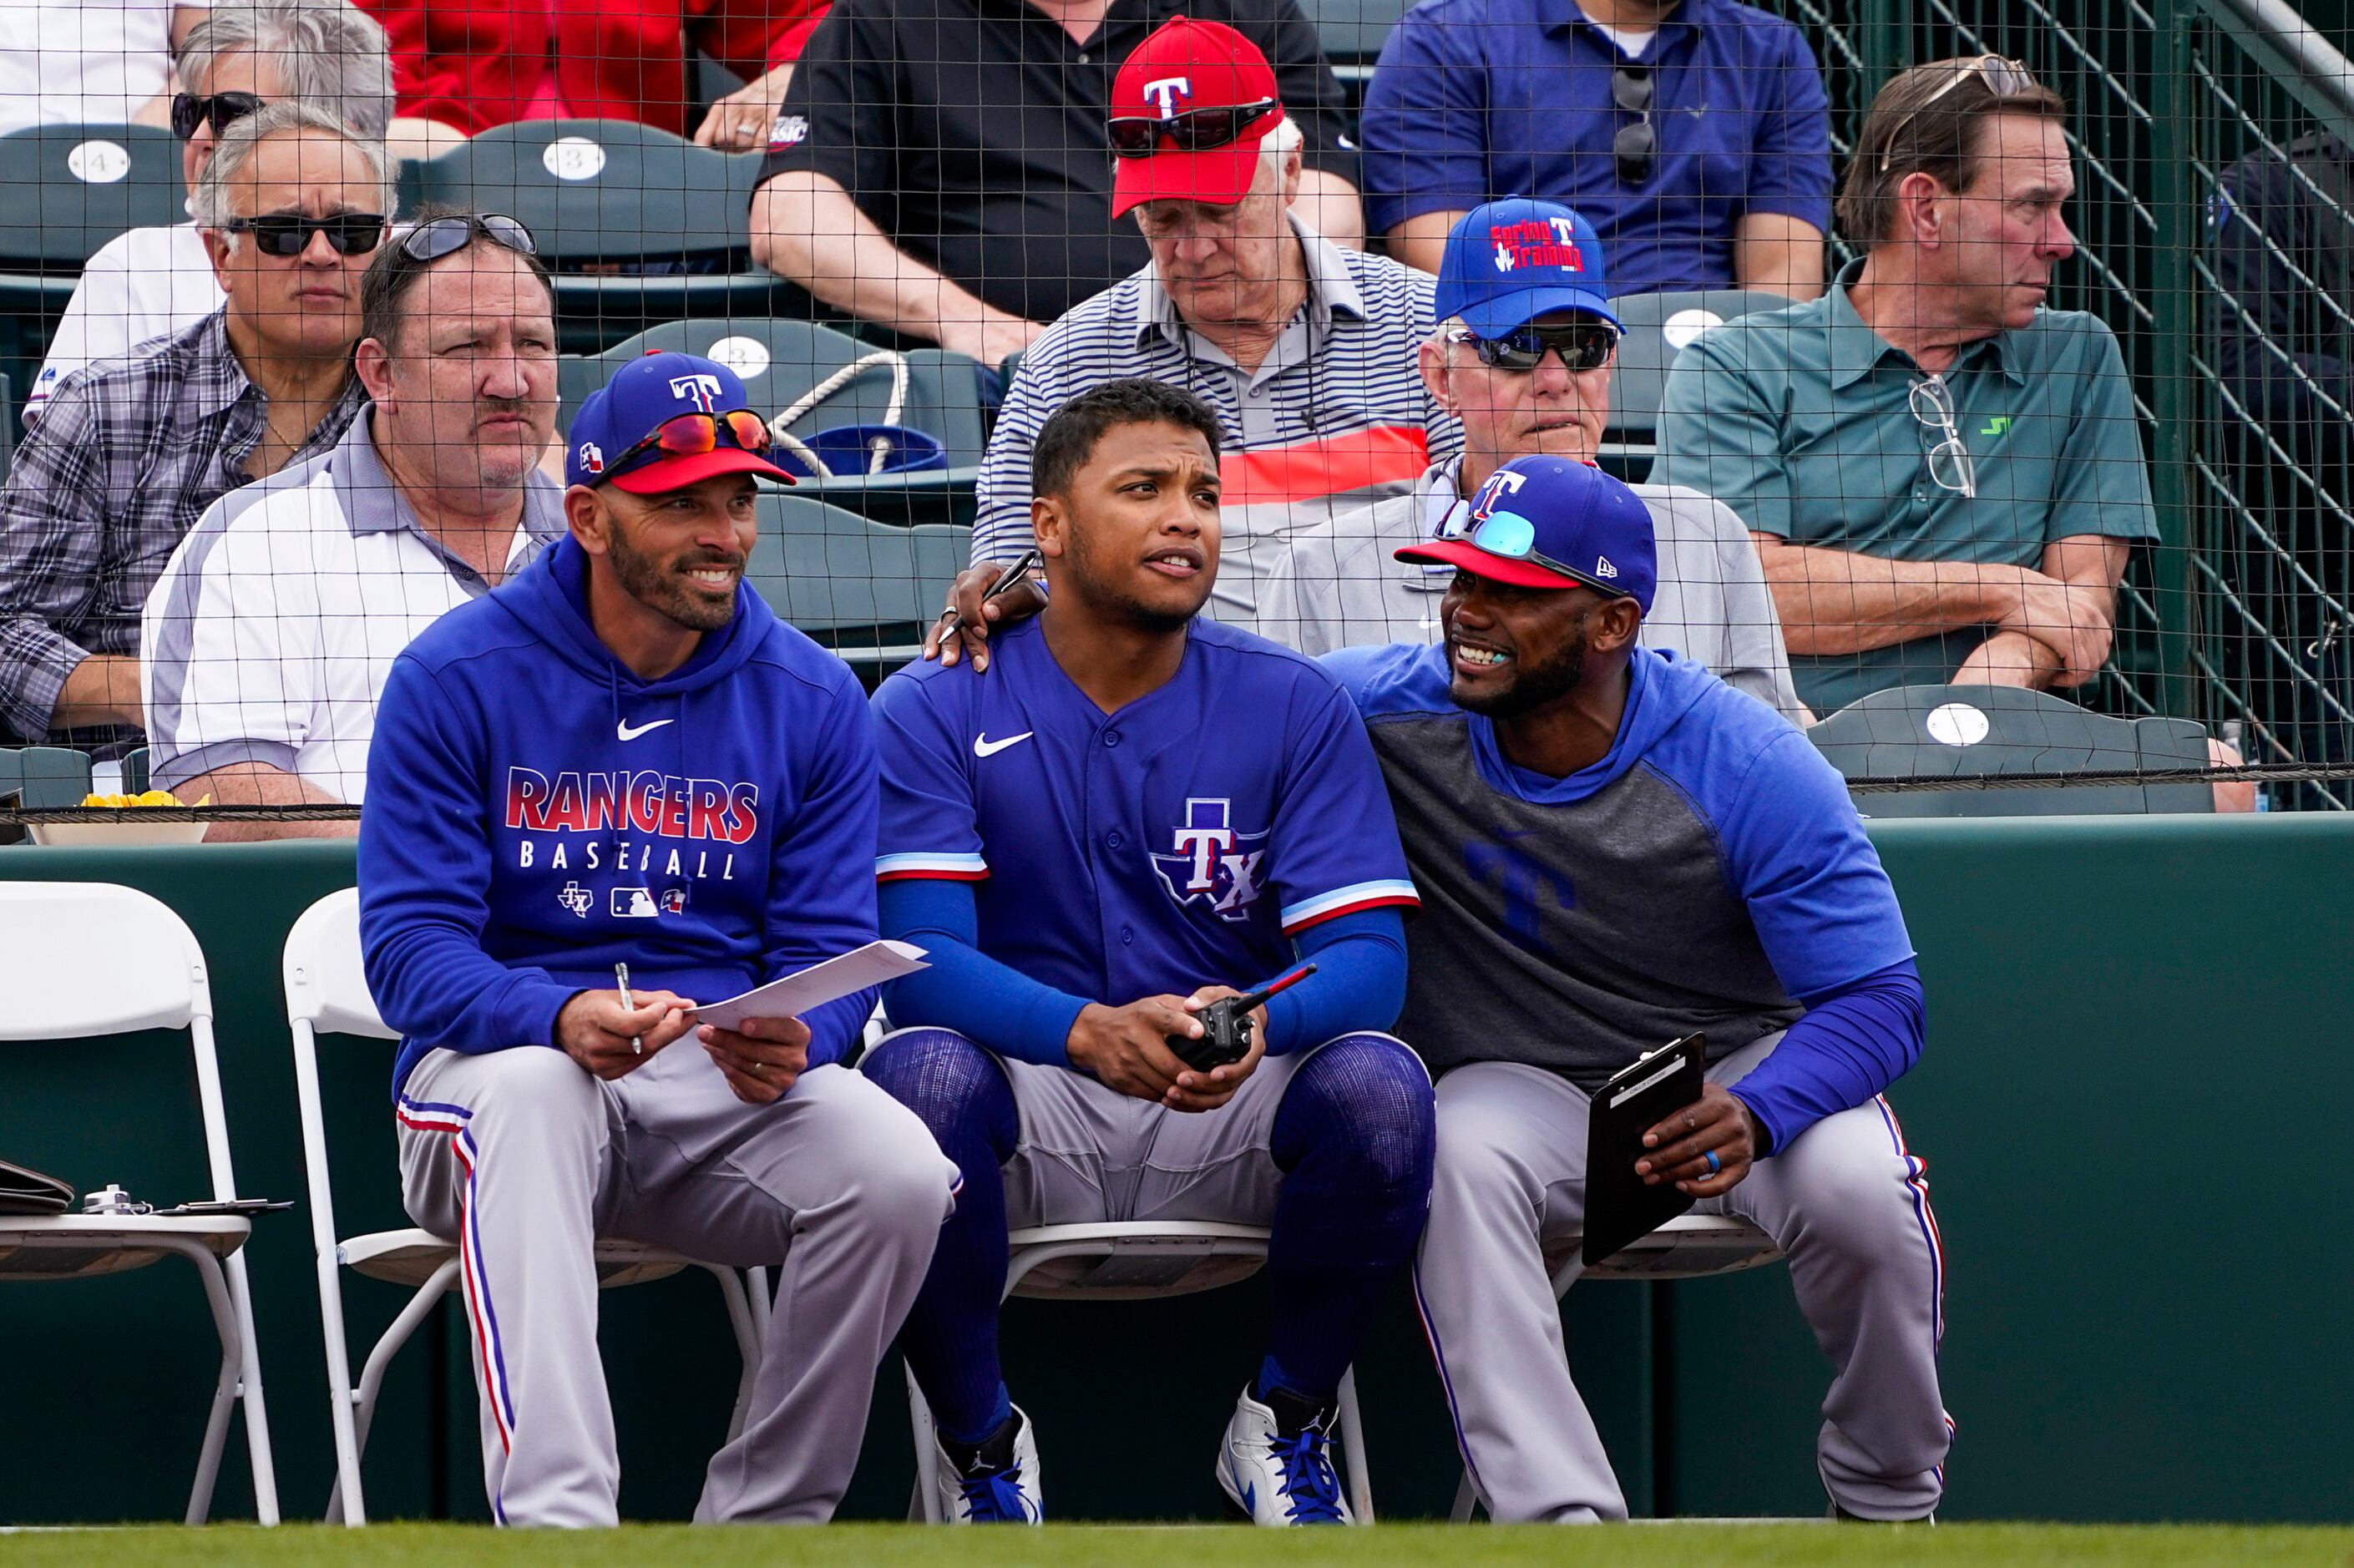 Joey Gallo reacts to scary moment with best friend Willie Calhoun